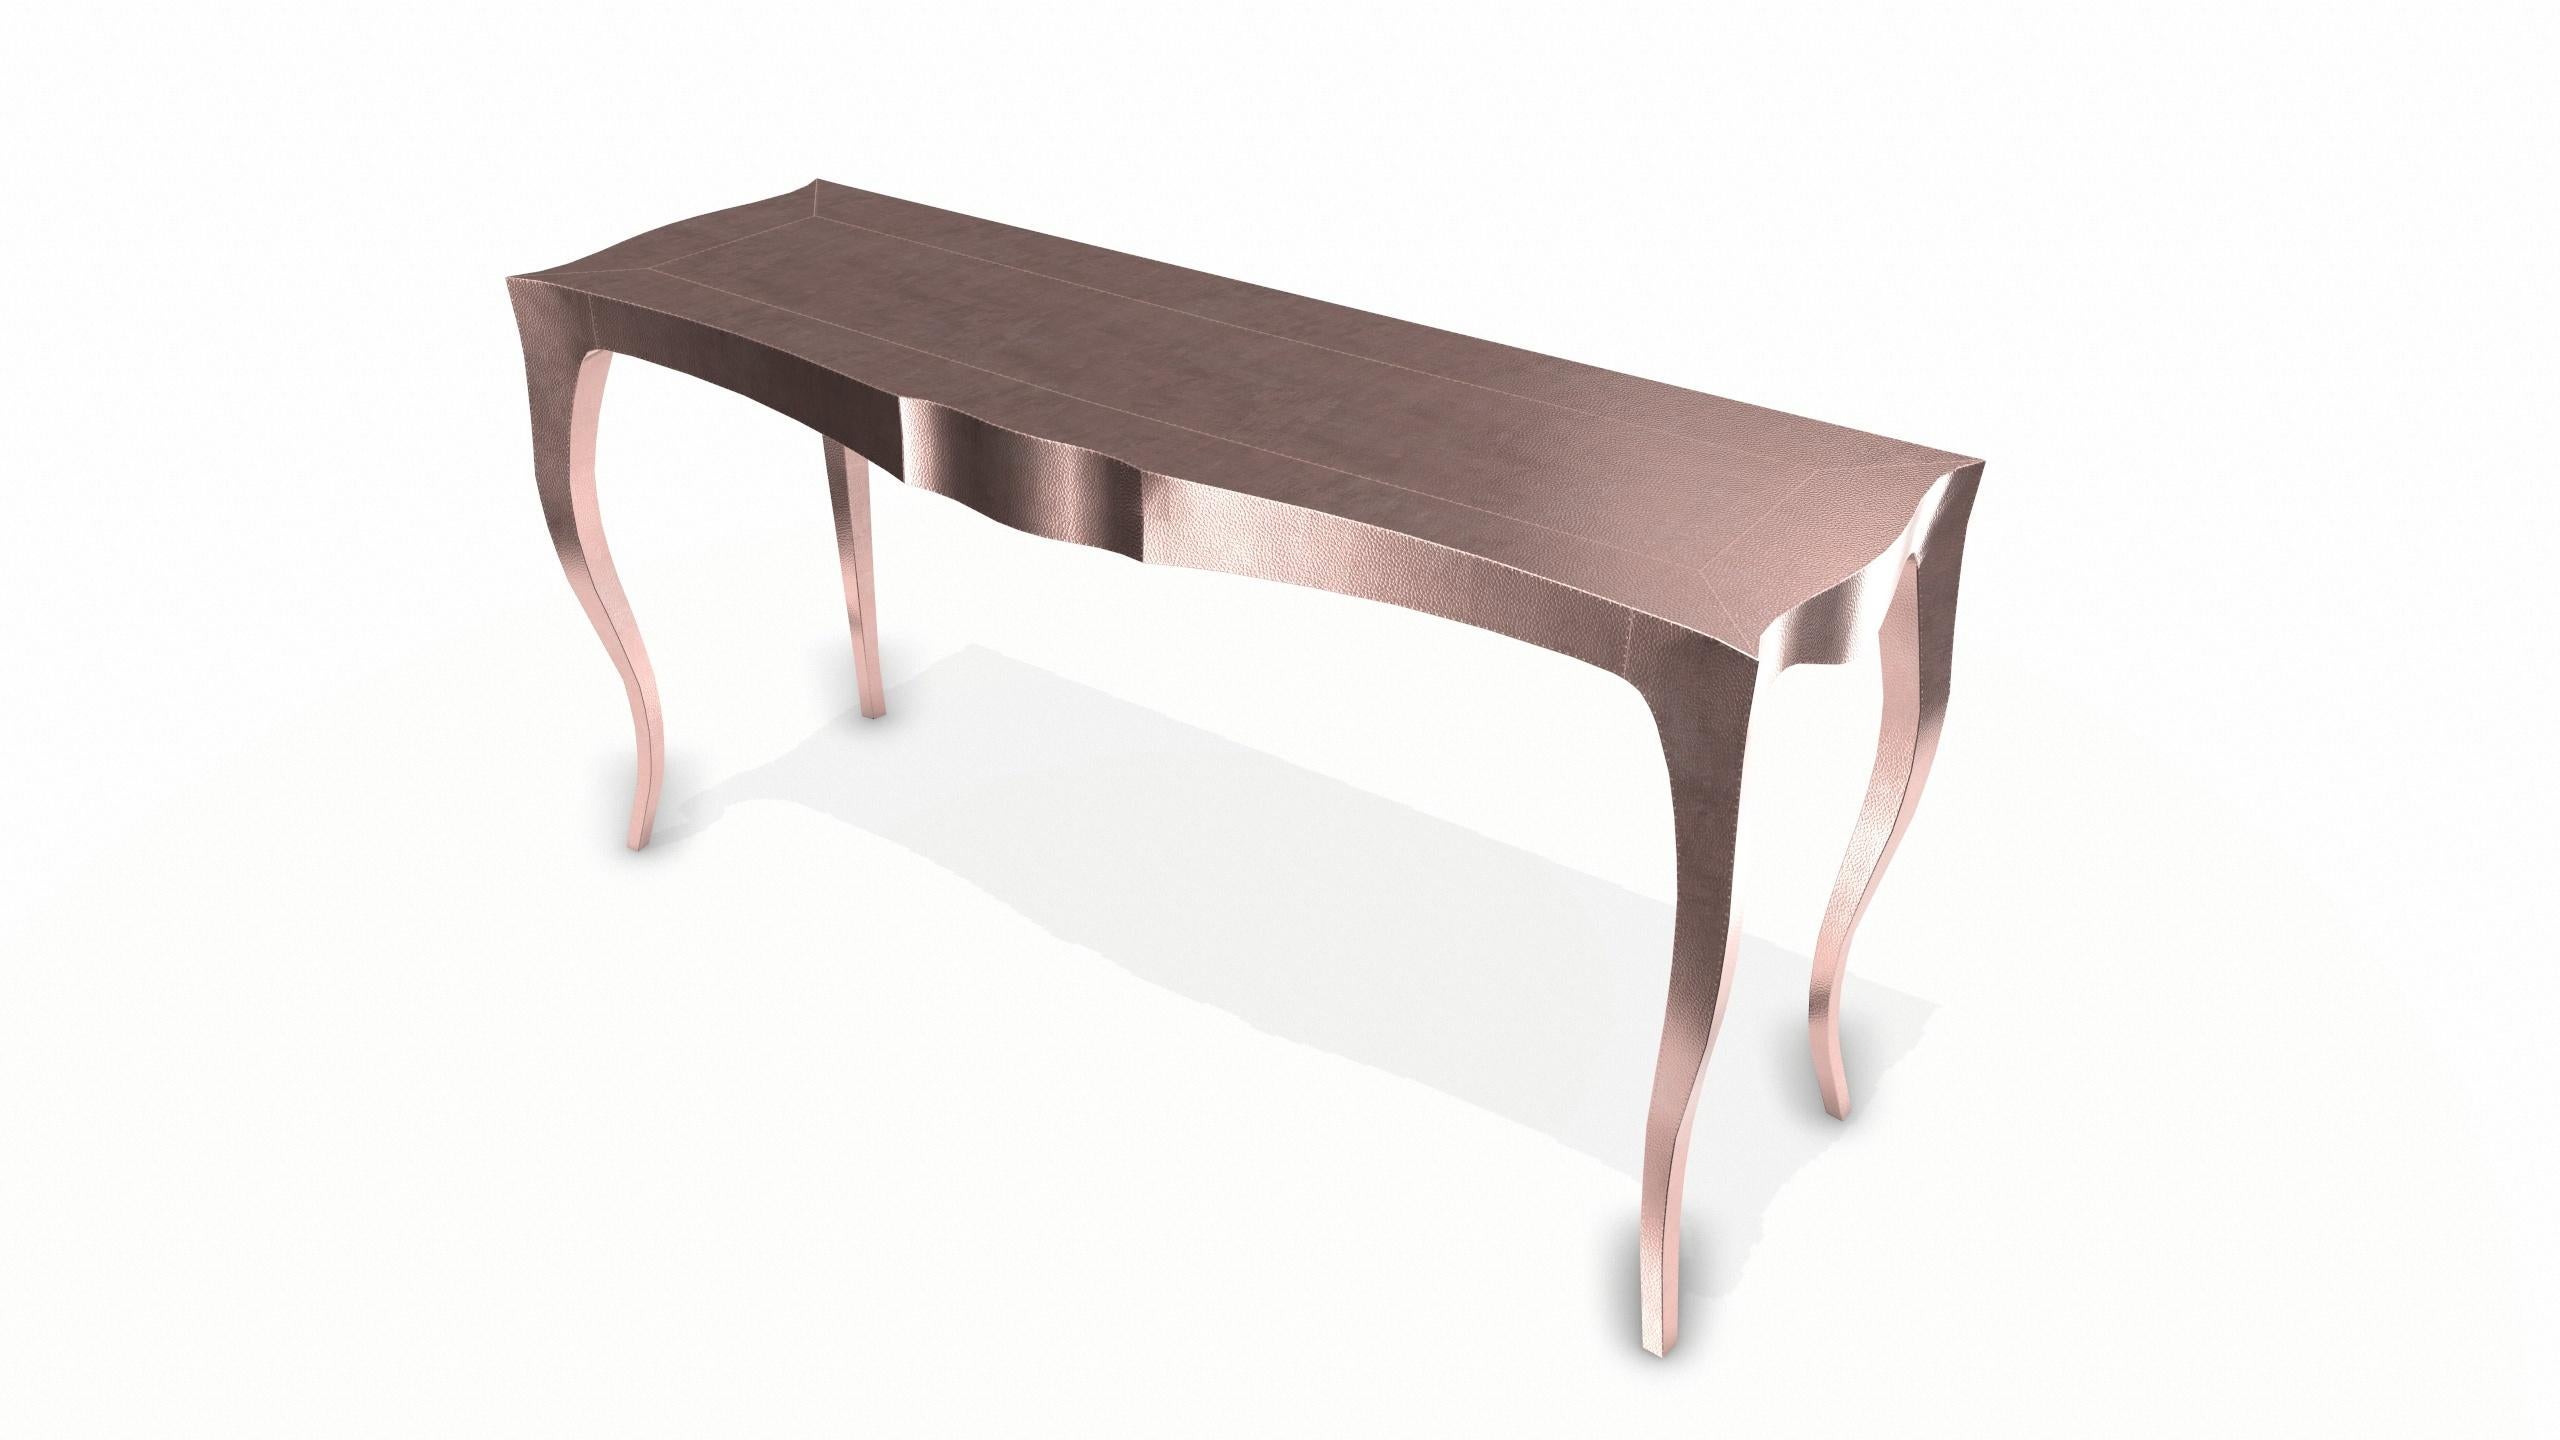 Other Louise Console Art Deco Conference Tables Mid. Hammered Copper by Paul Mathieu For Sale